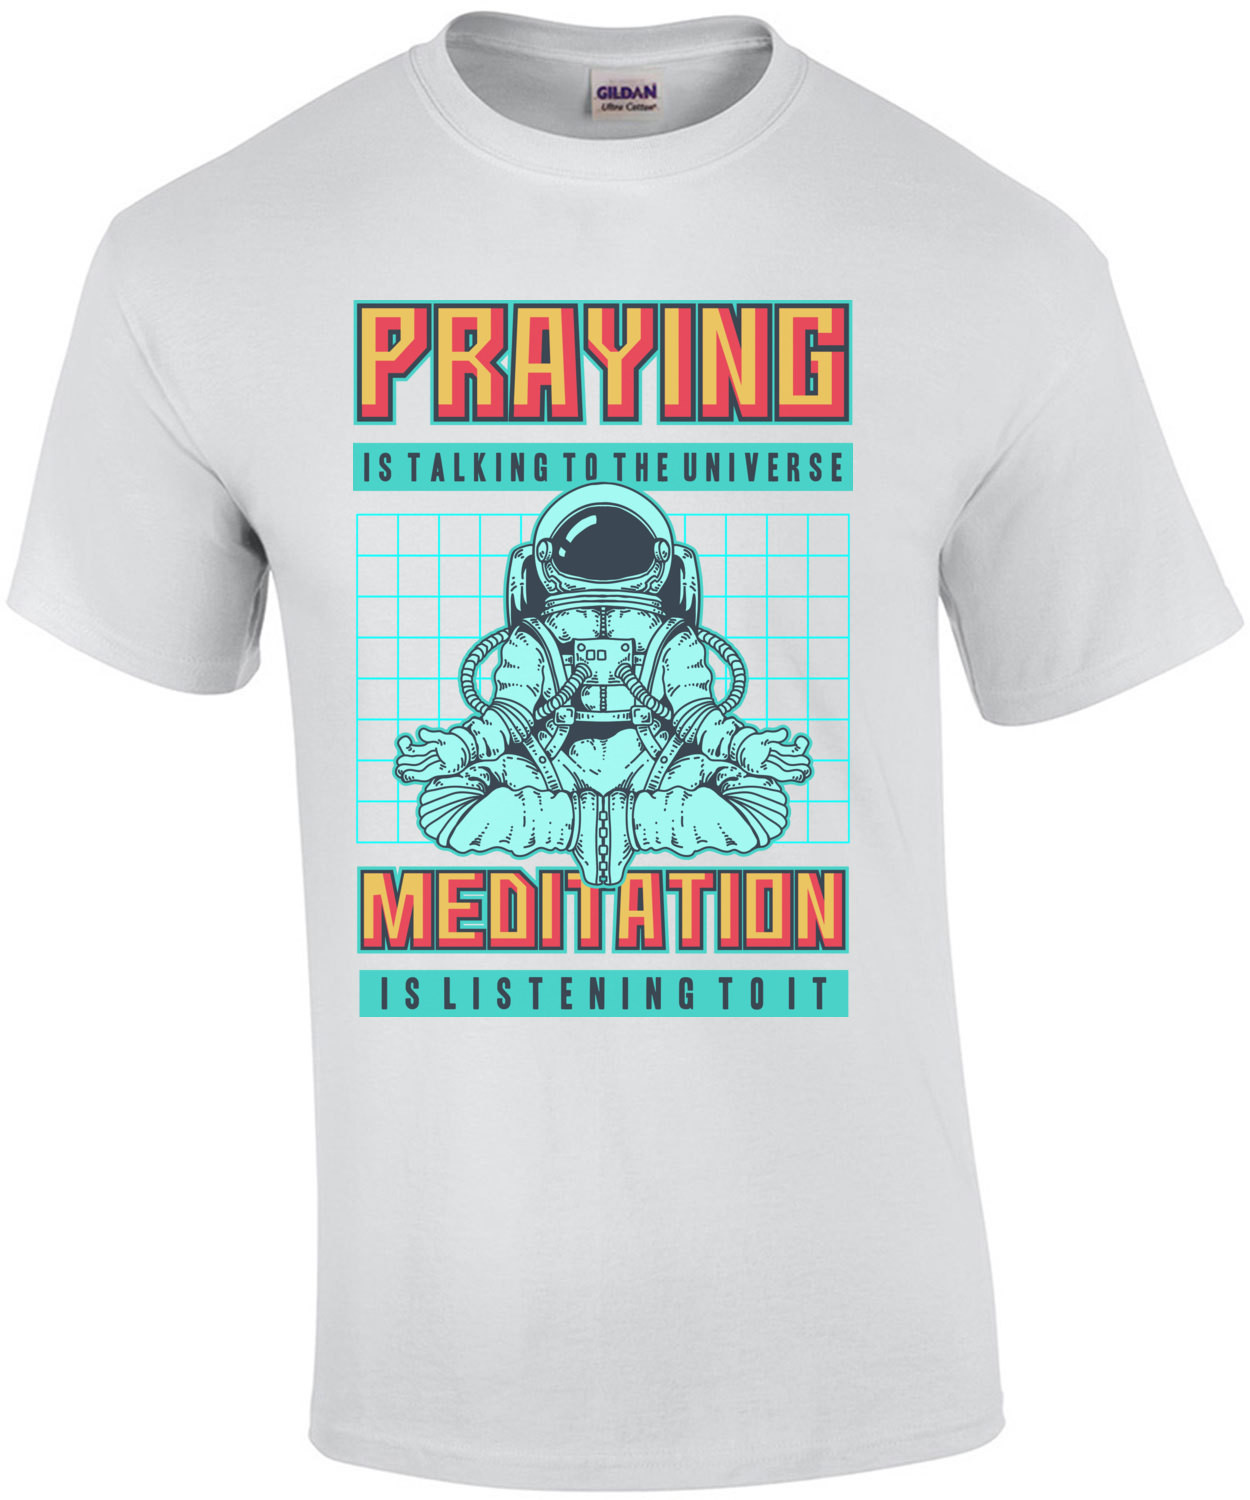 Praying Is Talking To The Universe Meditation Is Listening To It T-Shirt